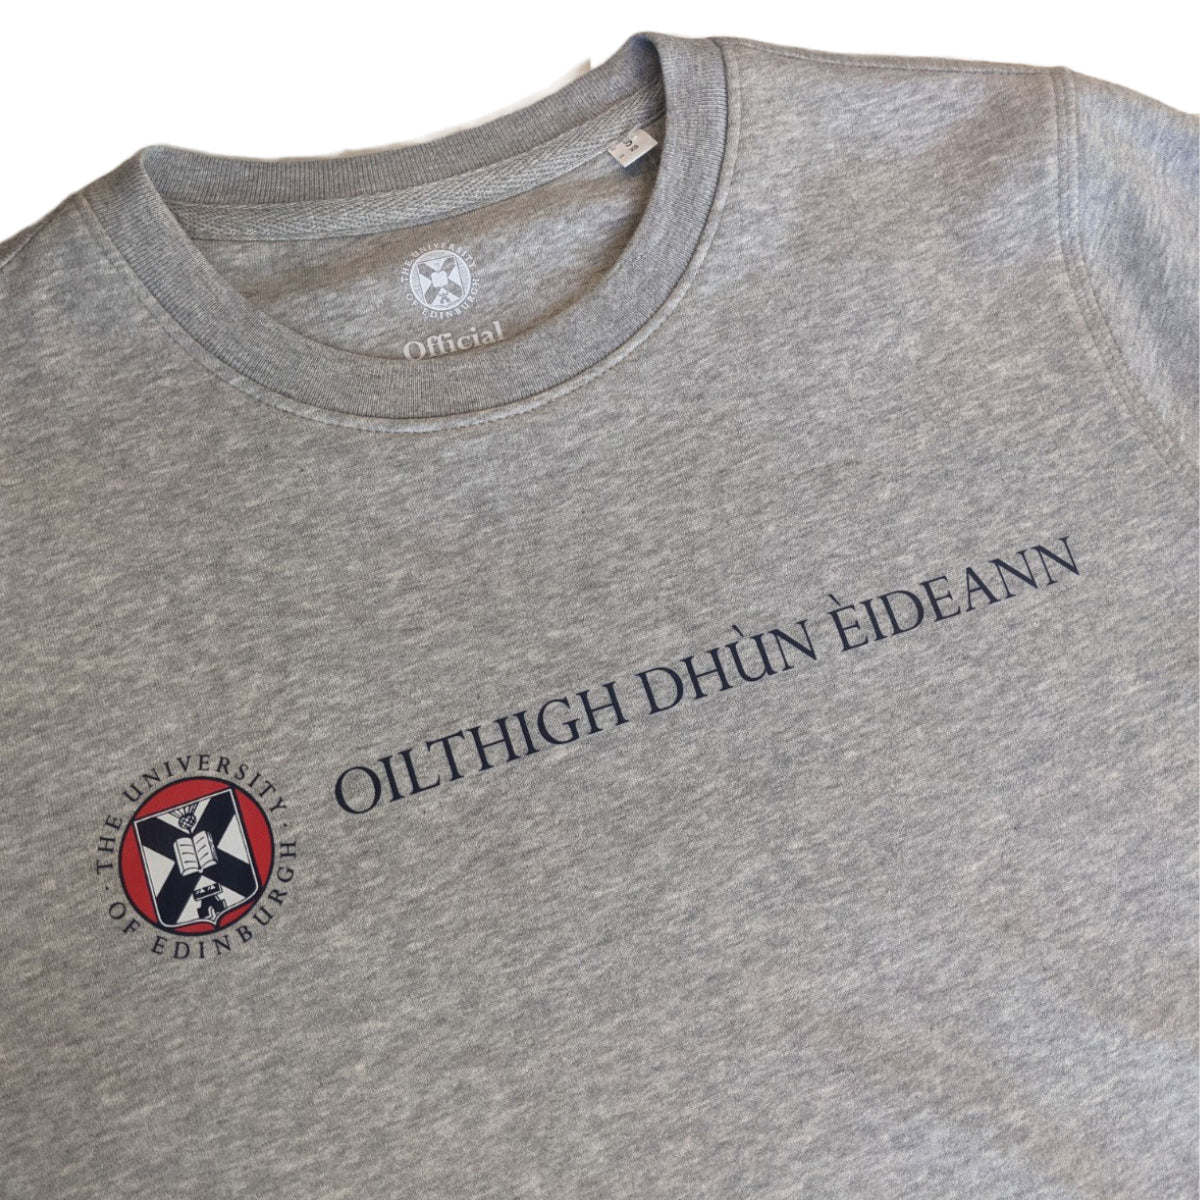 close up of Grey Sweatshirt with the University name in Gaelic in navy print and university crest in navy red and white print